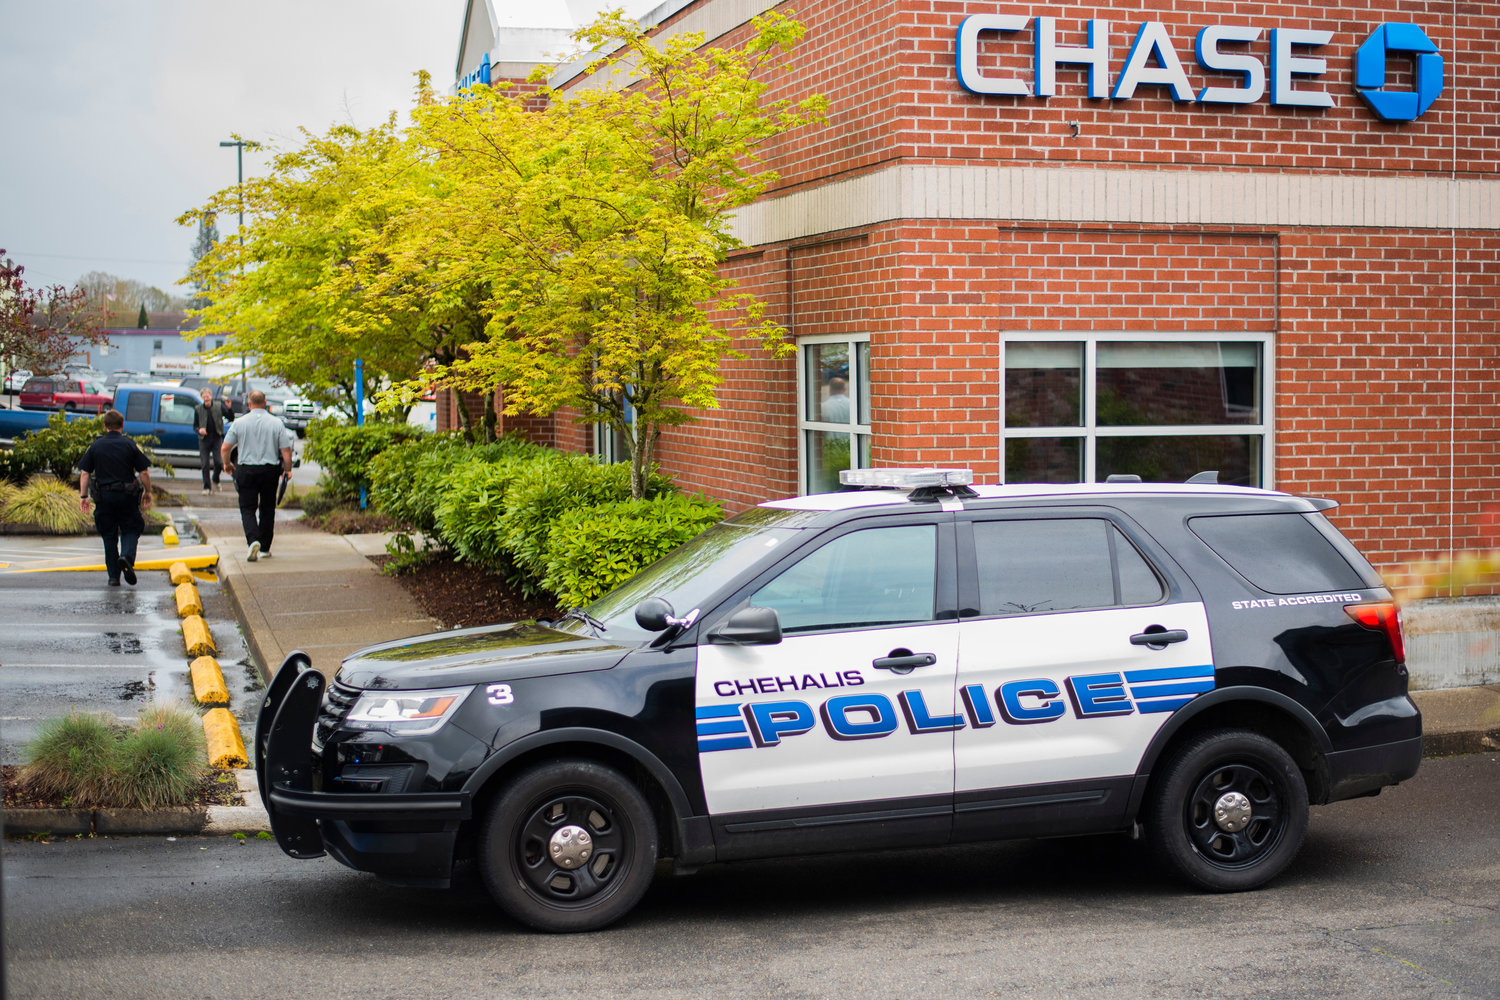 Police officers and vehicles are seen outside Chase Bank in Chehalis on Friday.